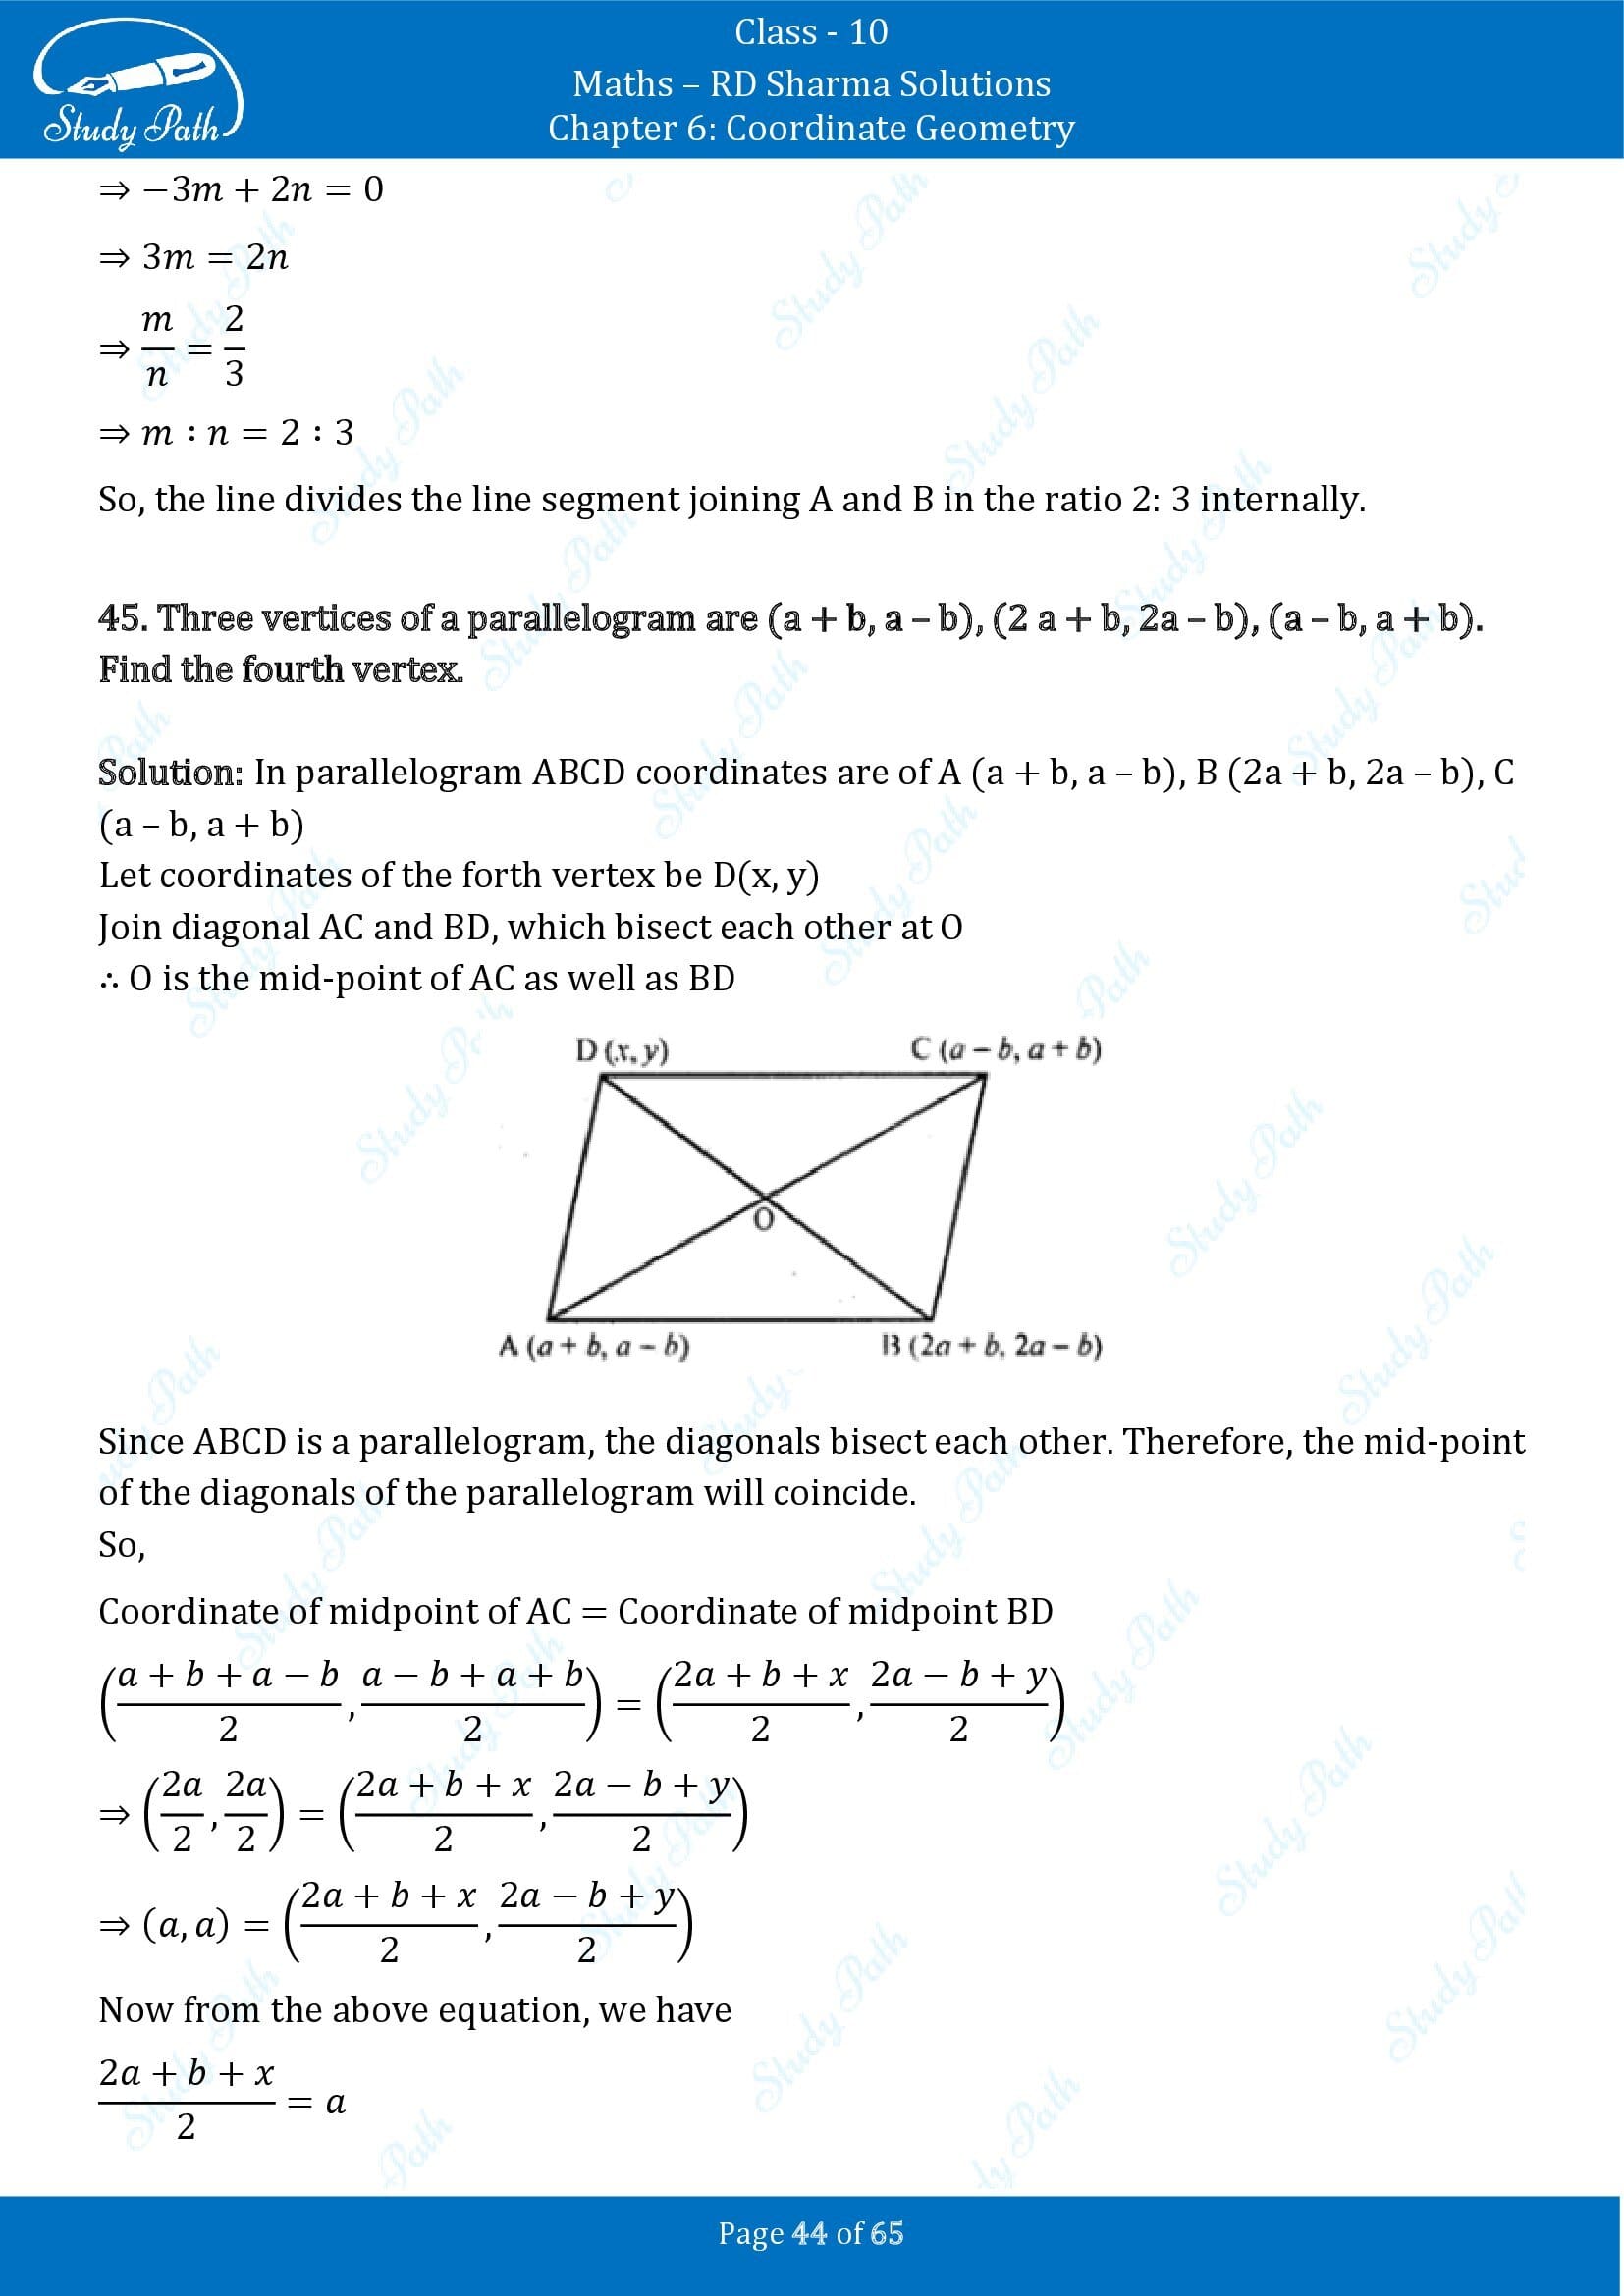 RD Sharma Solutions Class 10 Chapter 6 Coordinate Geometry Exercise 6.3 00044